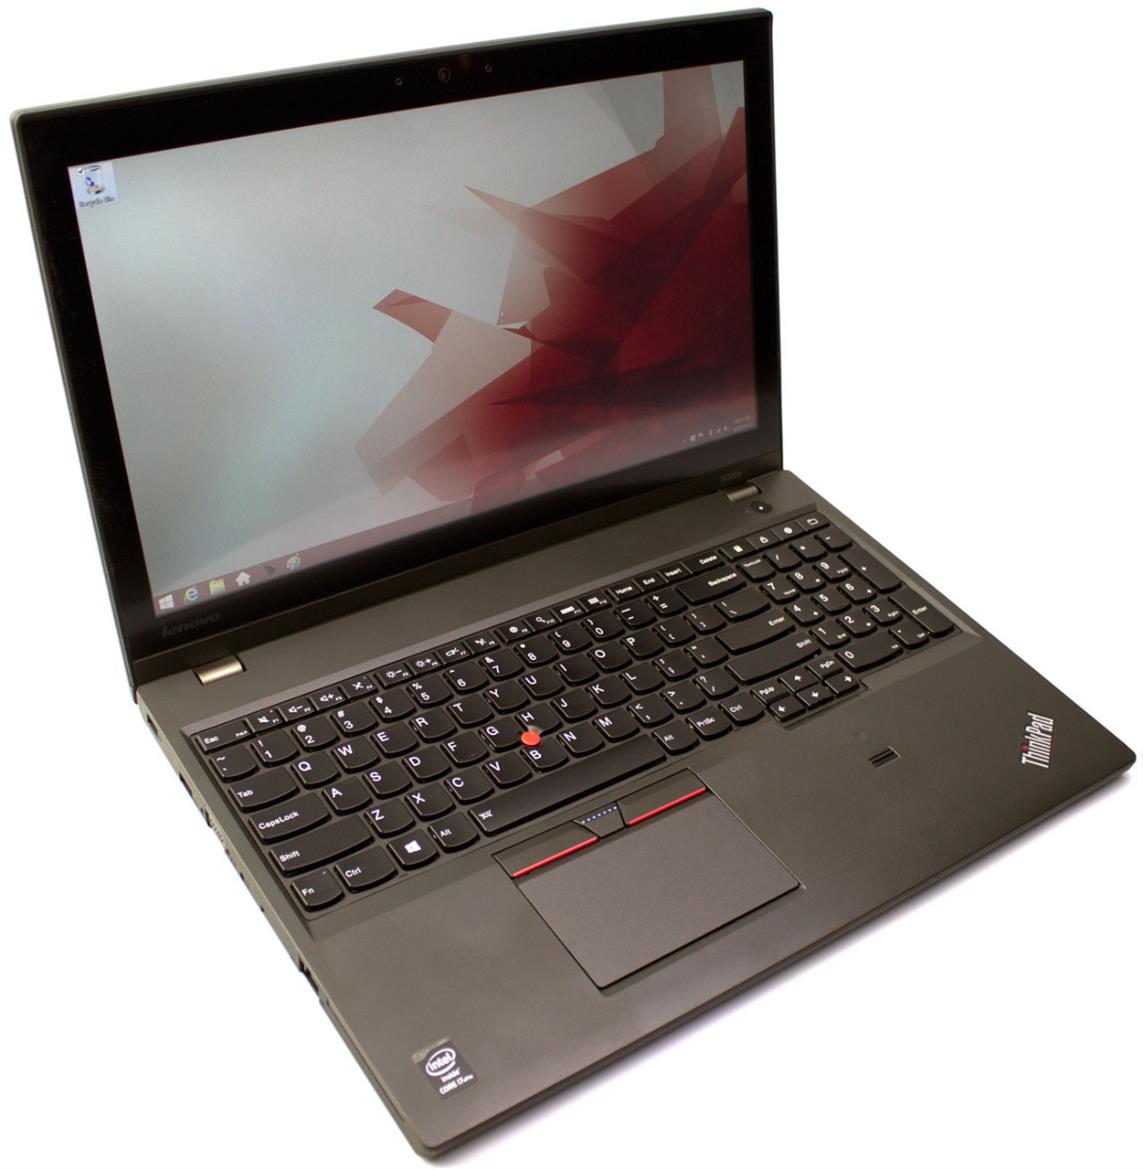 Lenovo ThinkPad W550s Ultrabook Mobile Workstation Review